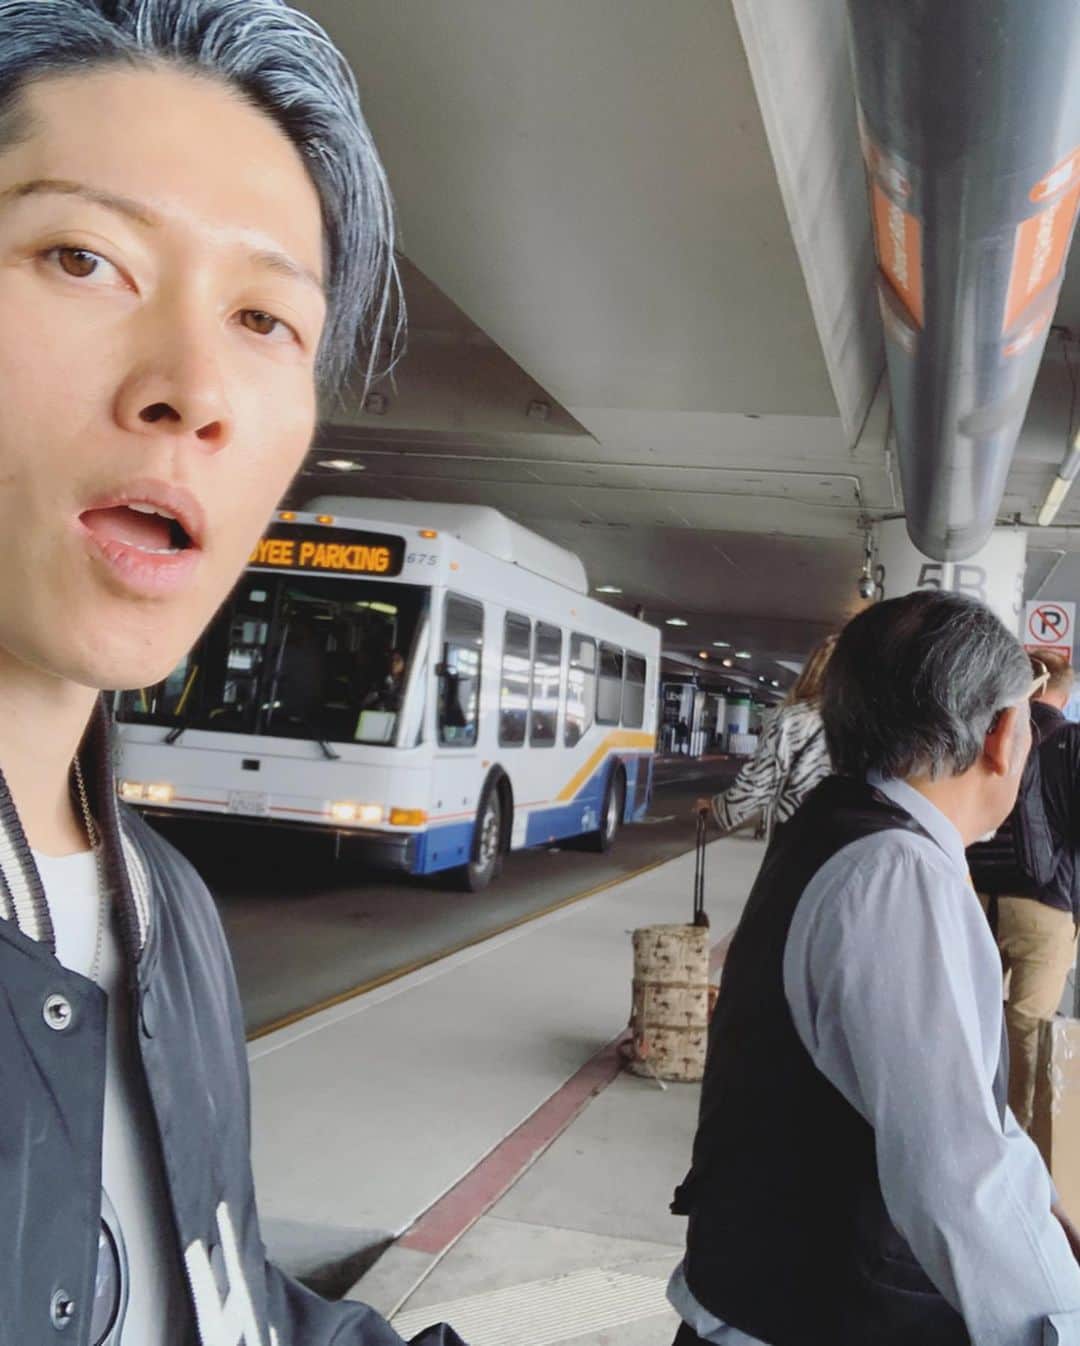 雅-MIYAVI-さんのインスタグラム写真 - (雅-MIYAVI-Instagram)「Successfully wrapped up the bullet trip to LA in the mid of the ASIA tour ✈️ What a pleasure to perform at such an important event with people who make a strong bridge between the U.S. and Japan. Thank you so much for inviting us @usjapancouncil and Mrs.Kaifu from @japanhousela who contacted me to offer us a moment to play at this event. Also, big appreciation to @americanair Japan & US team. You guys made this trip really happen and it went freakin smooth just like silk. Srsly, without your support, I would’ve fallen asleep onstage. LOL (Arrived at the hotel at 2PM and hit the stage at 6PM 😵) Really proud of being an ambassador of your team. Thank you, I’ll do my best!!!! 💪🏻And of course the MIYAVI US tour crew @miyavi_staff did an amazing job onstage as always. Was also such a great reunion after the EU tour! Deeply hope the relationship between the U.S. and Japan develops even stronger, bonds tight and proceeds to do lots of great things for the entire world with some of the leading countries. 🙏🏻🌎🌏🌍 Thank you. アジアツアーからのロサンゼルス弾丸ツアー、無事に遂行することができました！！日米の架け橋となる様々な方々が集まるこの場所で演奏することができ、光栄でした。お声がけくださったジャパンハウス海部館長をはじめ、US-JAPAN Counsil チームのみなさん、ありがとうございました！！そして今回の旅を最高のものにしてくれた日米のアメリカン・エアラインチームにも感謝します。(あなたたちのサービスがなければ、ステージで寝ていたかもしれません！😂）もちろん、MIYAVI US クルーも頑張ってくれました。いつもありがとう！僕たちのパフォーマンスがこれからの日米交流の発展に少しでも貢献できたなら幸いです。🙌🏻🙌🏻😃🇺🇸🤝🇯🇵 #USJCAC  #JapanHouse #AmeicanAirlines #アメリカン航空 #America #US #Japan #MIYAVI」11月8日 8時16分 - miyavi_ishihara